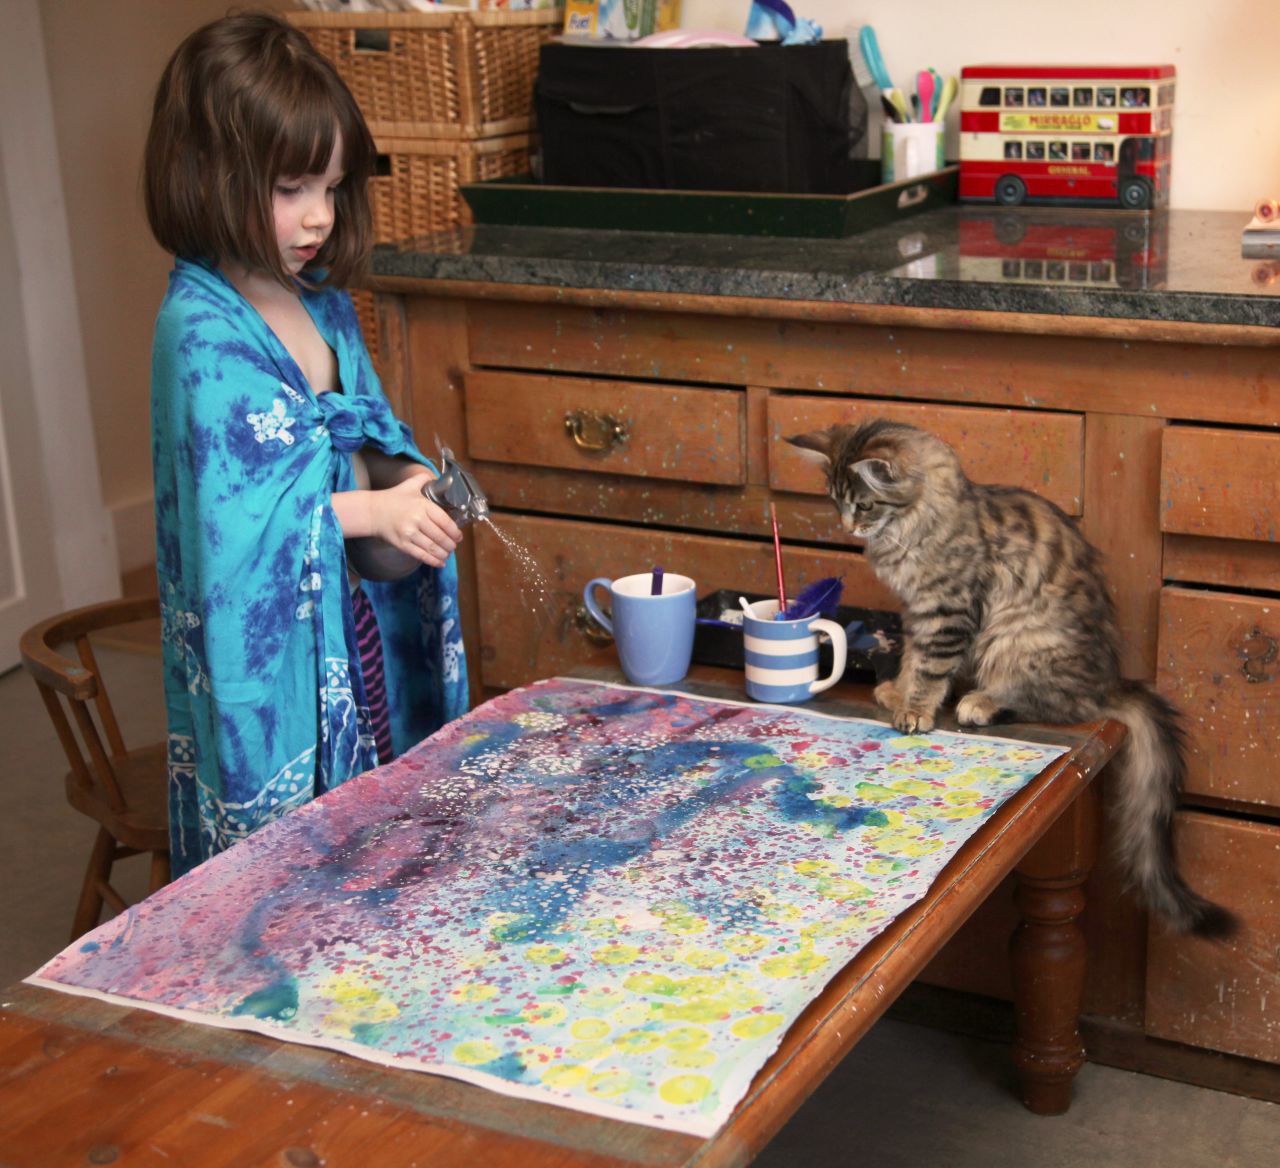 Iris' cat, Thula, is a 'therapy cat', who helps Iris develop a sense of companionship. The two are inseparable, especially when Iris is painting. They even have baths together.